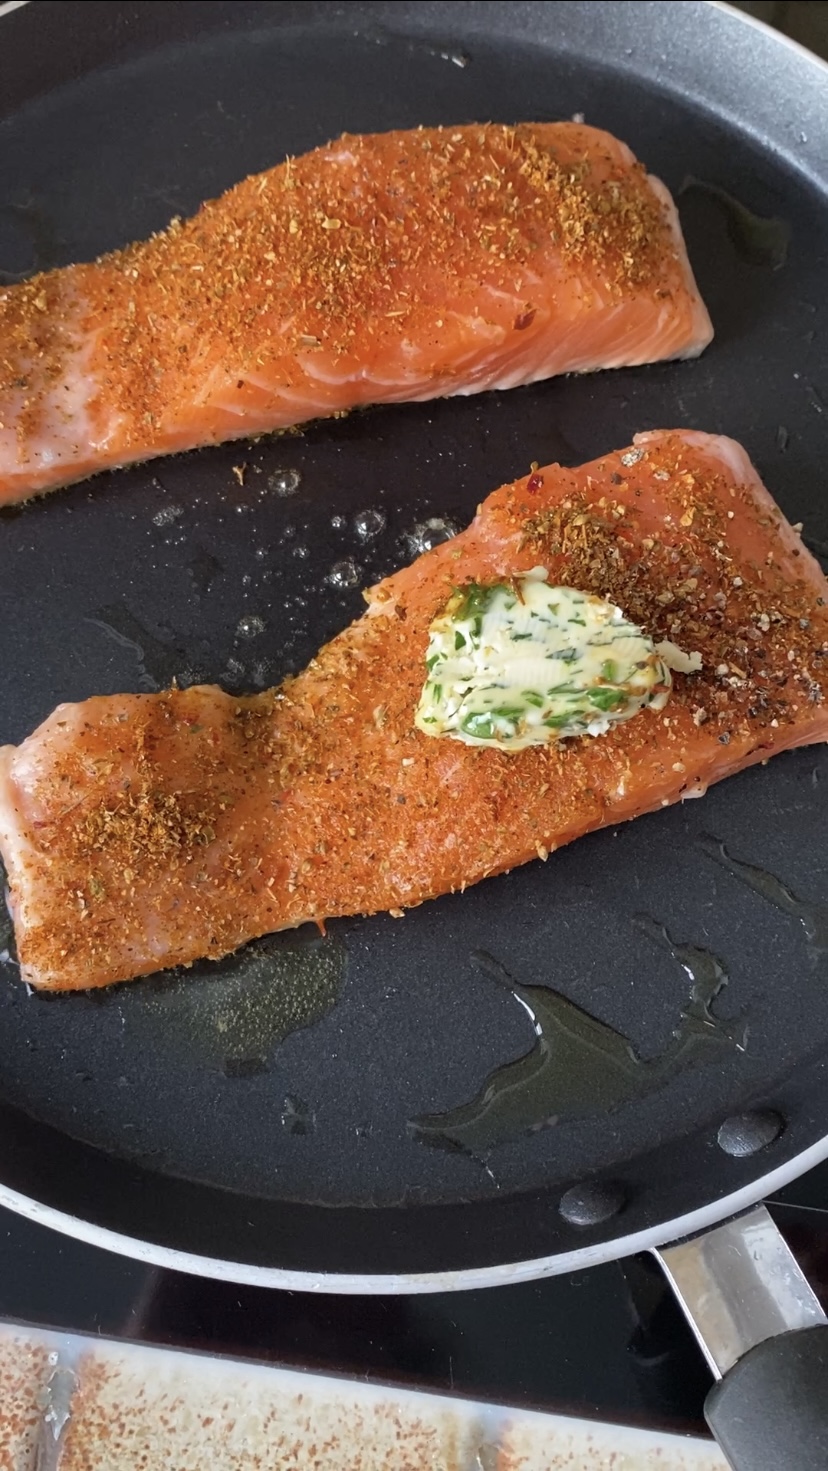 Slice of herb butter added on the salmon fillets, in the frying pan.